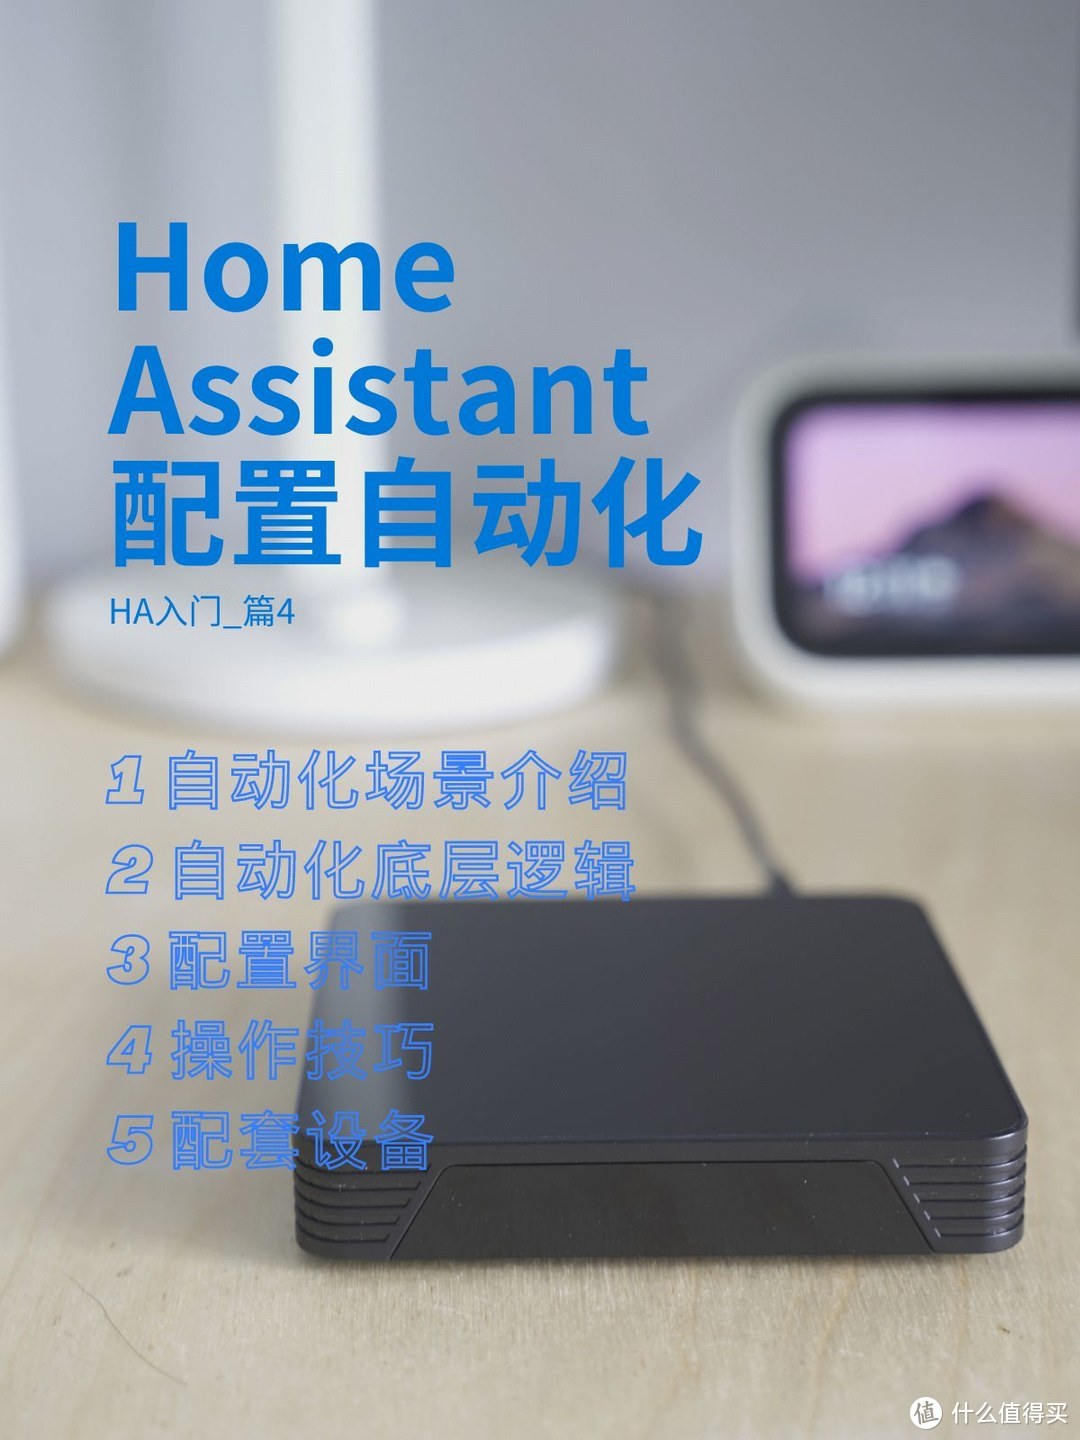 HomeAssistant入门_篇4：如何配置自动化